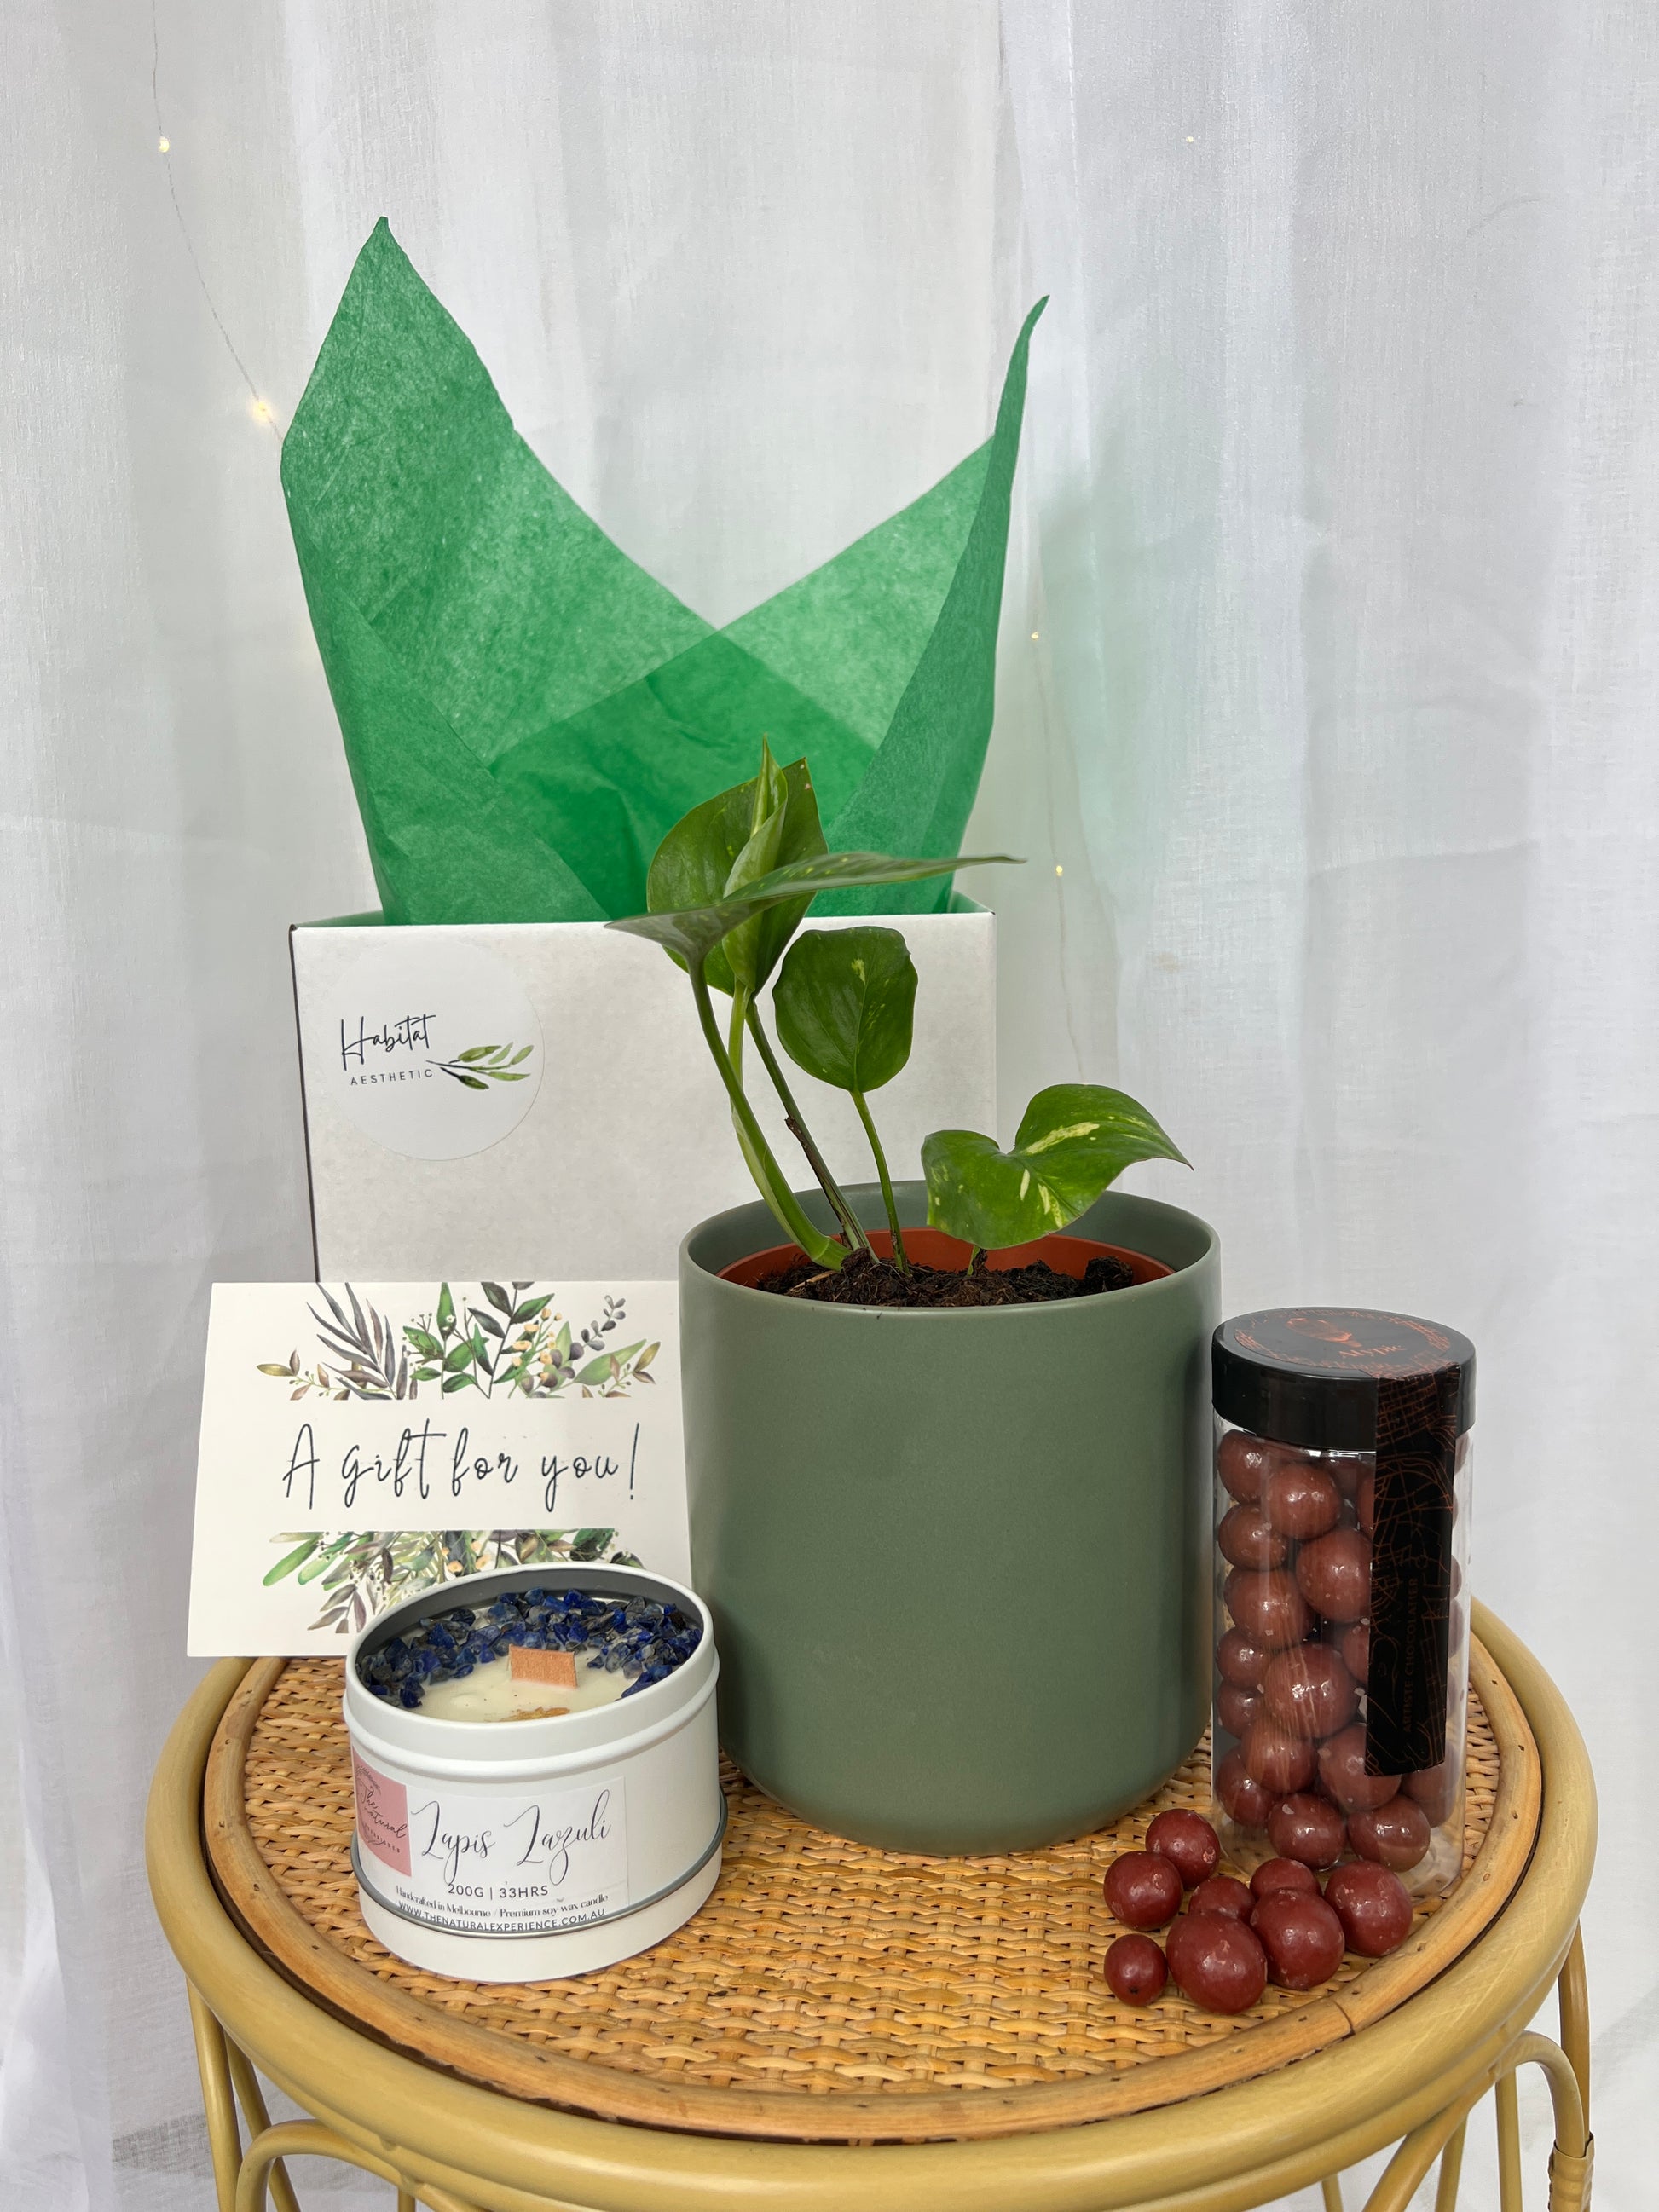 Plant Lovers Gift Box of Joy Satin Pothos Scindapsus Pictus Indoor Plant 12cm and Green Ceramic Pot and Atypic chocolates 130g and Natural Gem Soy Candle 200g